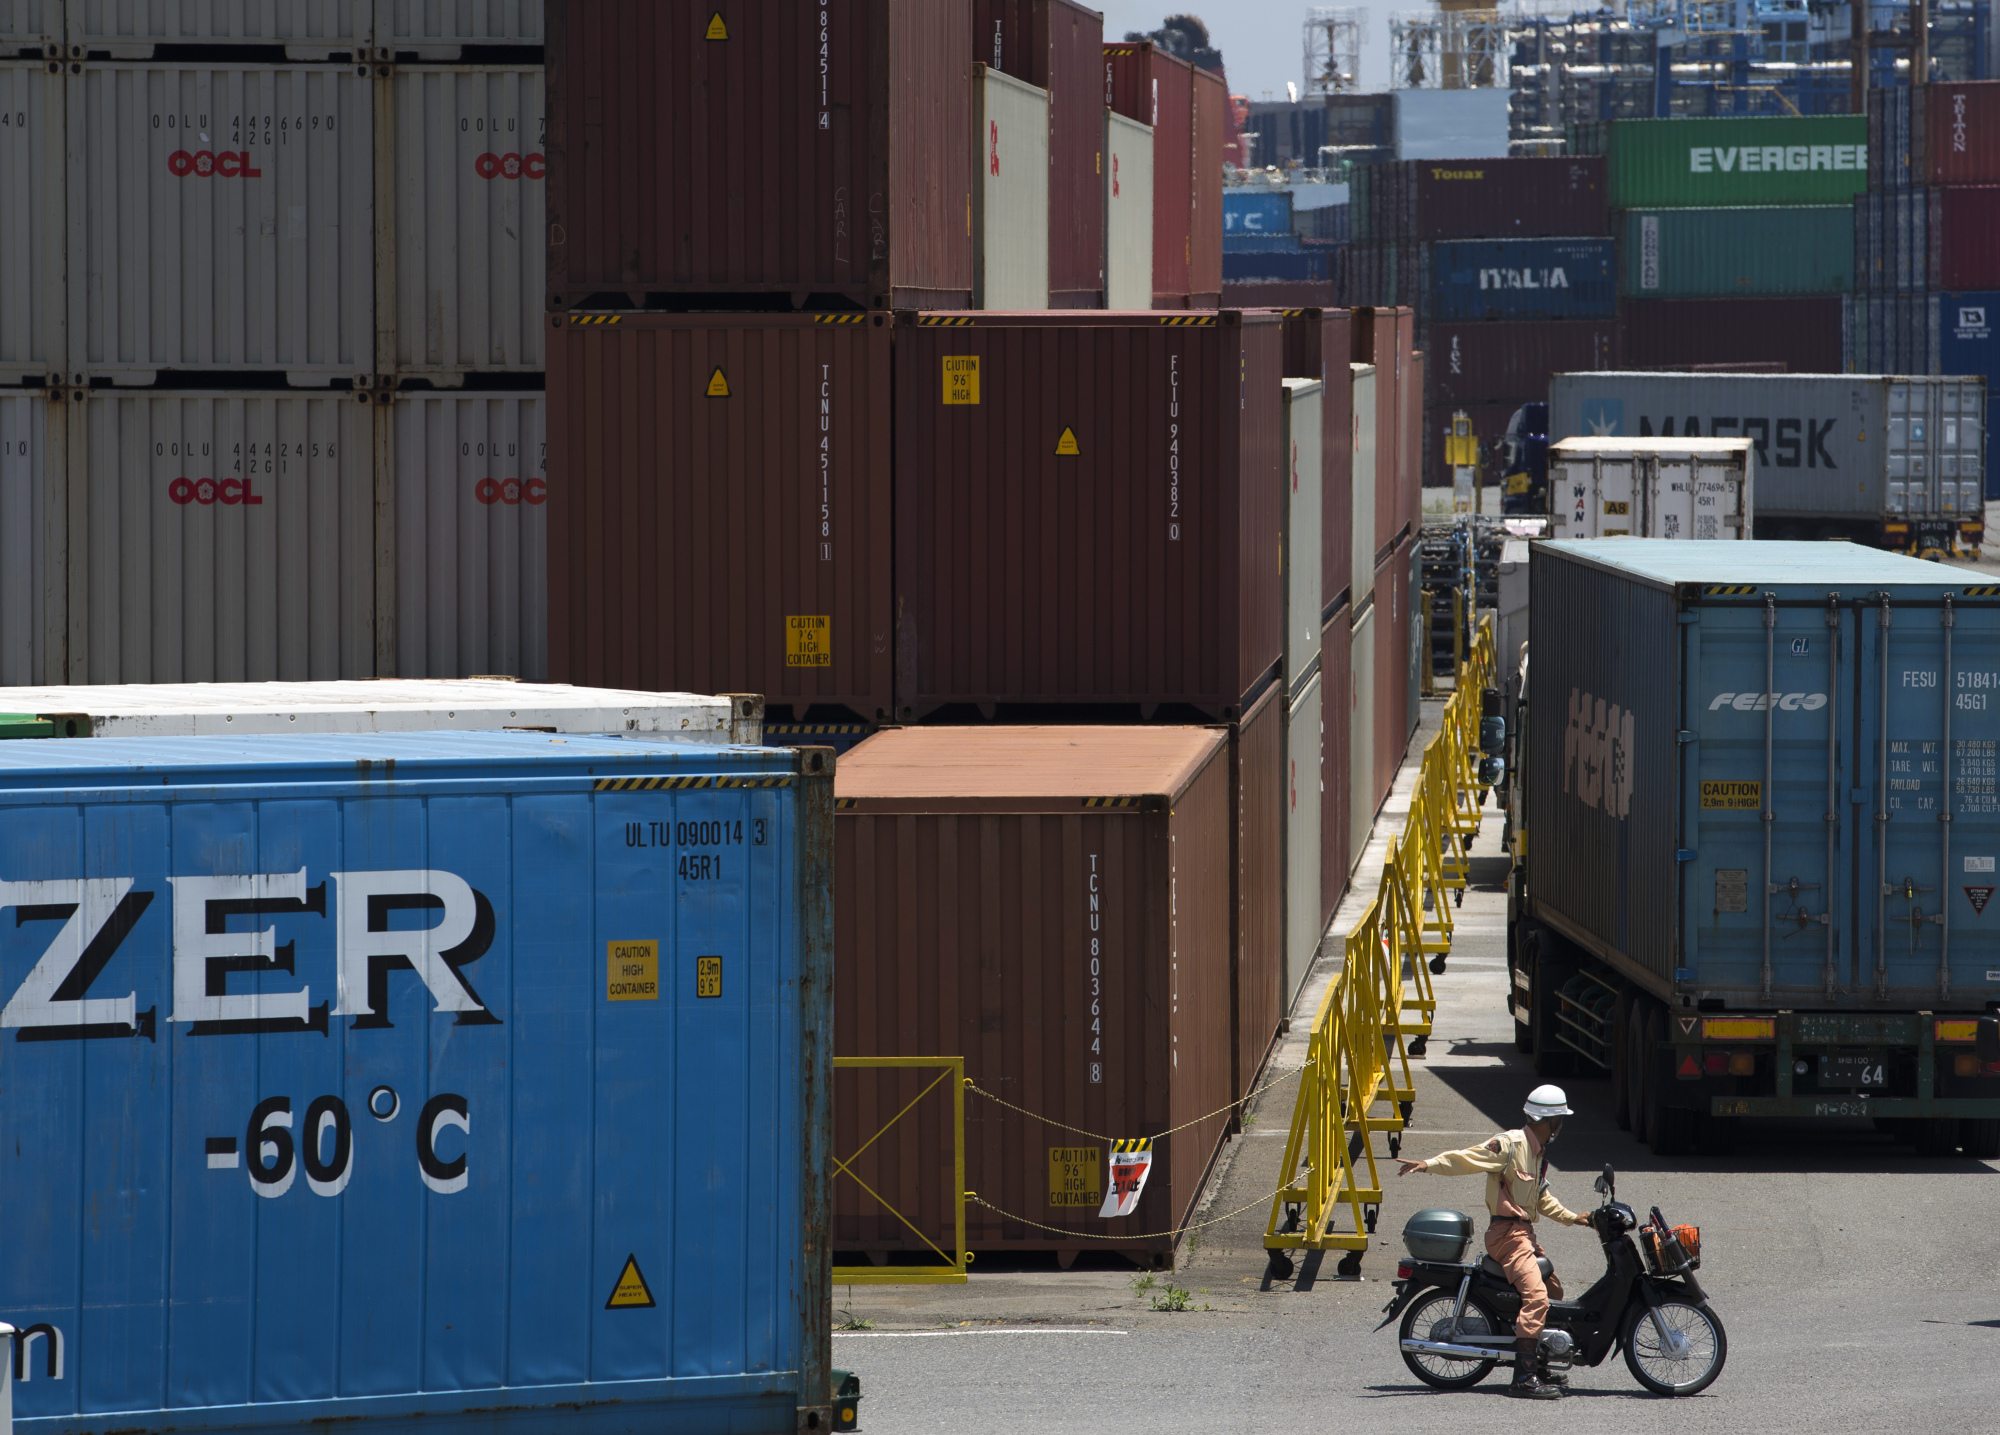 A worker sits on a scooter near shipping containers at a port in Shizuoka City, Shizuoka Prefecture, Japan, on Monday, June 27, 2016. Bank Of Japan Governor Haruhiko Kuroda has said lower interest rates are one of the goals of his policy mix of unprecedented asset purchases and a negative deposit rate, designed ultimately to drive inflation to 2 percent. Photographer: Tomohiro Ohsumi/Bloomberg